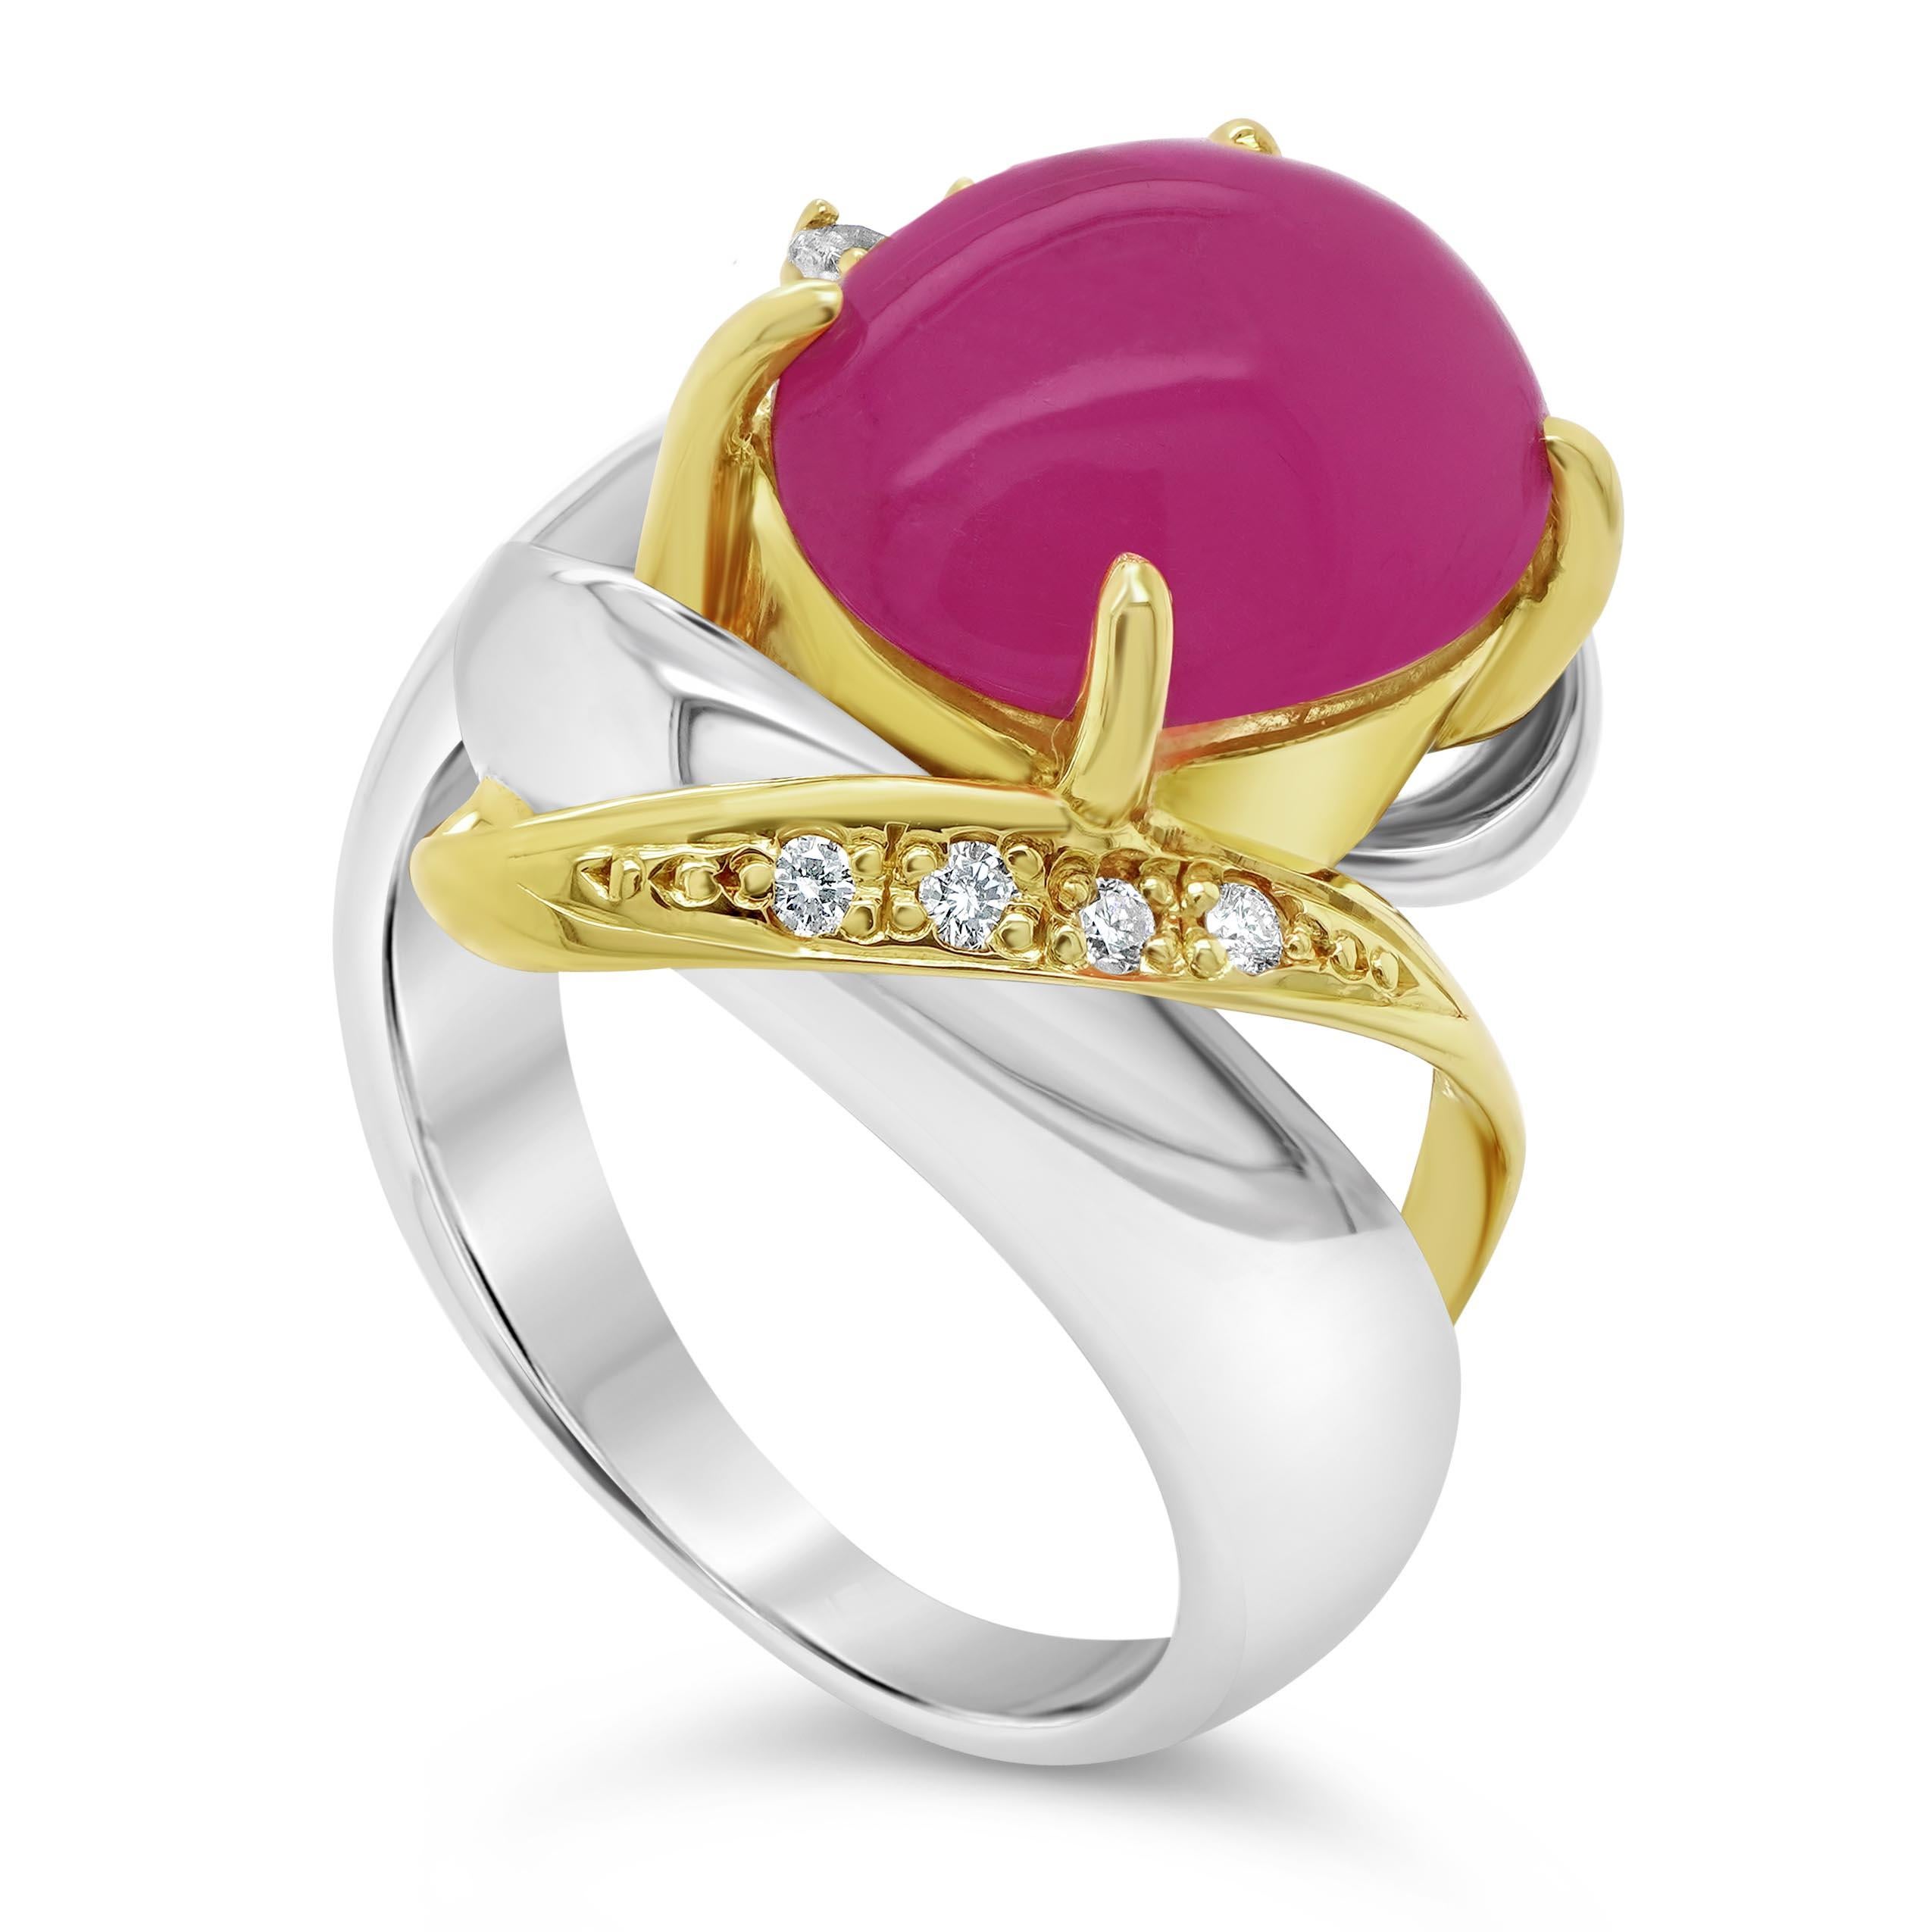 Contemporary Certified 6.29 Carat Vivid Pink Sapphire Cabochon Diamond Cocktail Ring For Sale